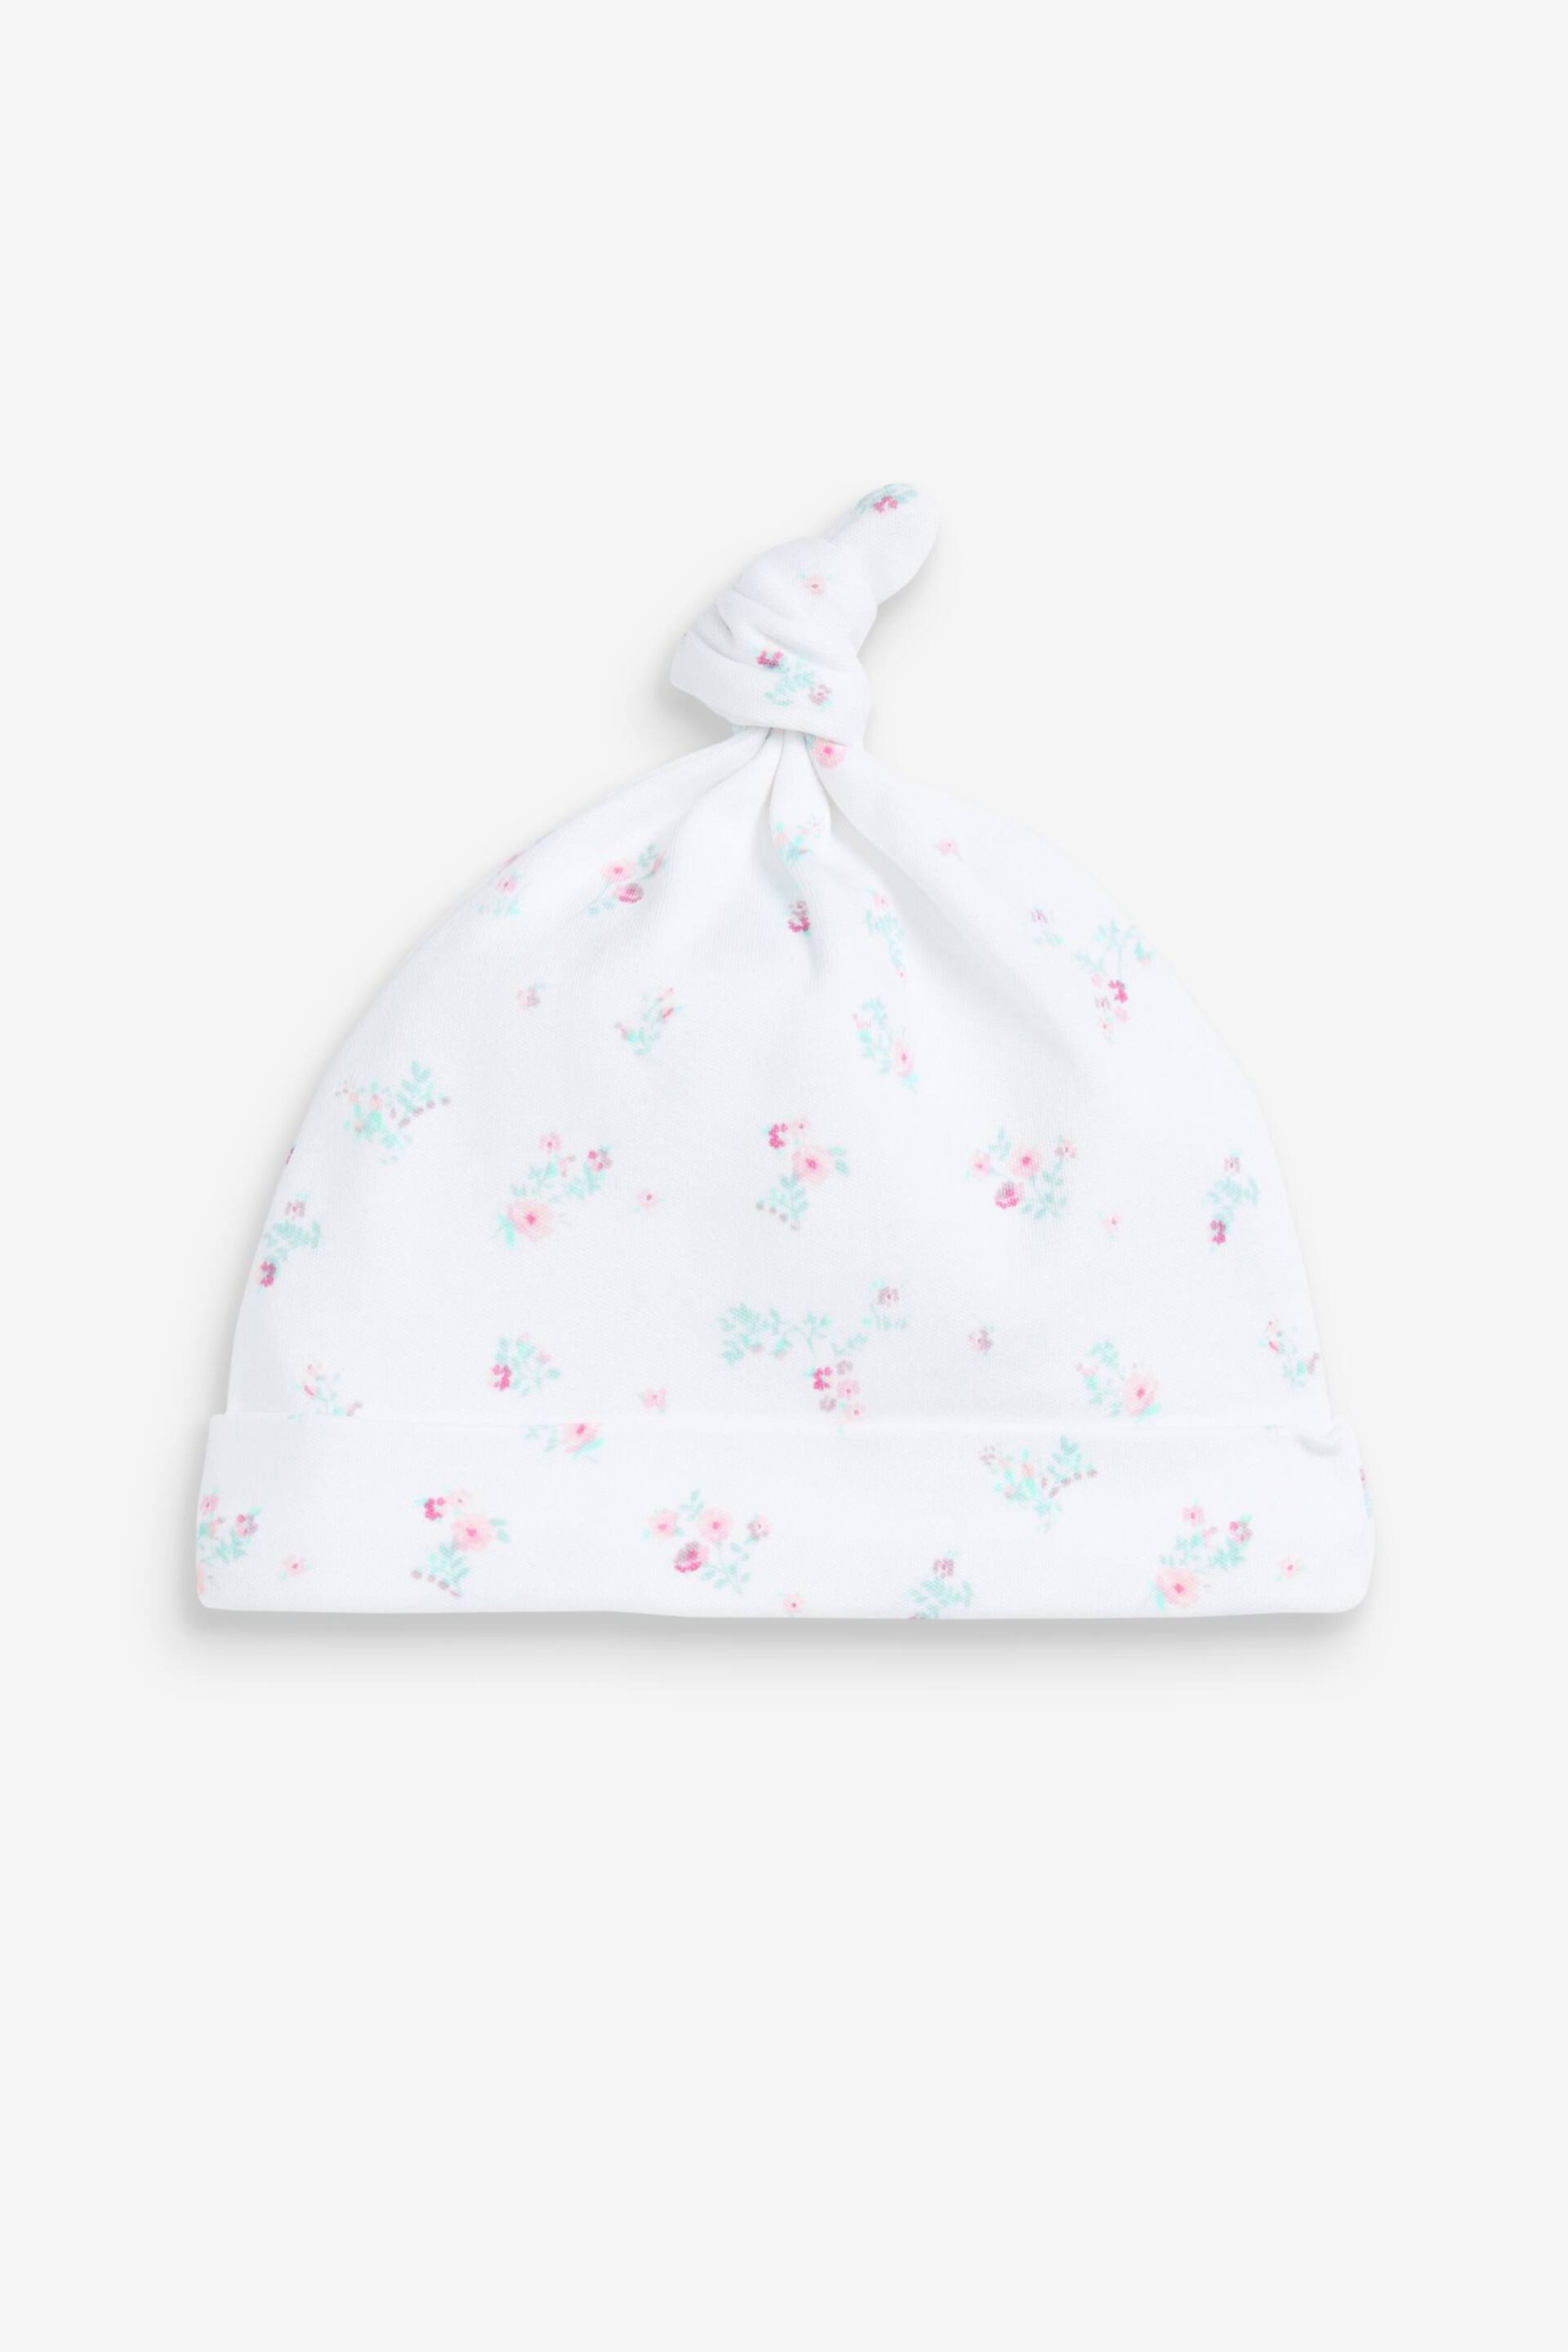 Pale Pink Floral Baby Tie Top Hat 3 Packs (0-18mths) - Image 3 of 5